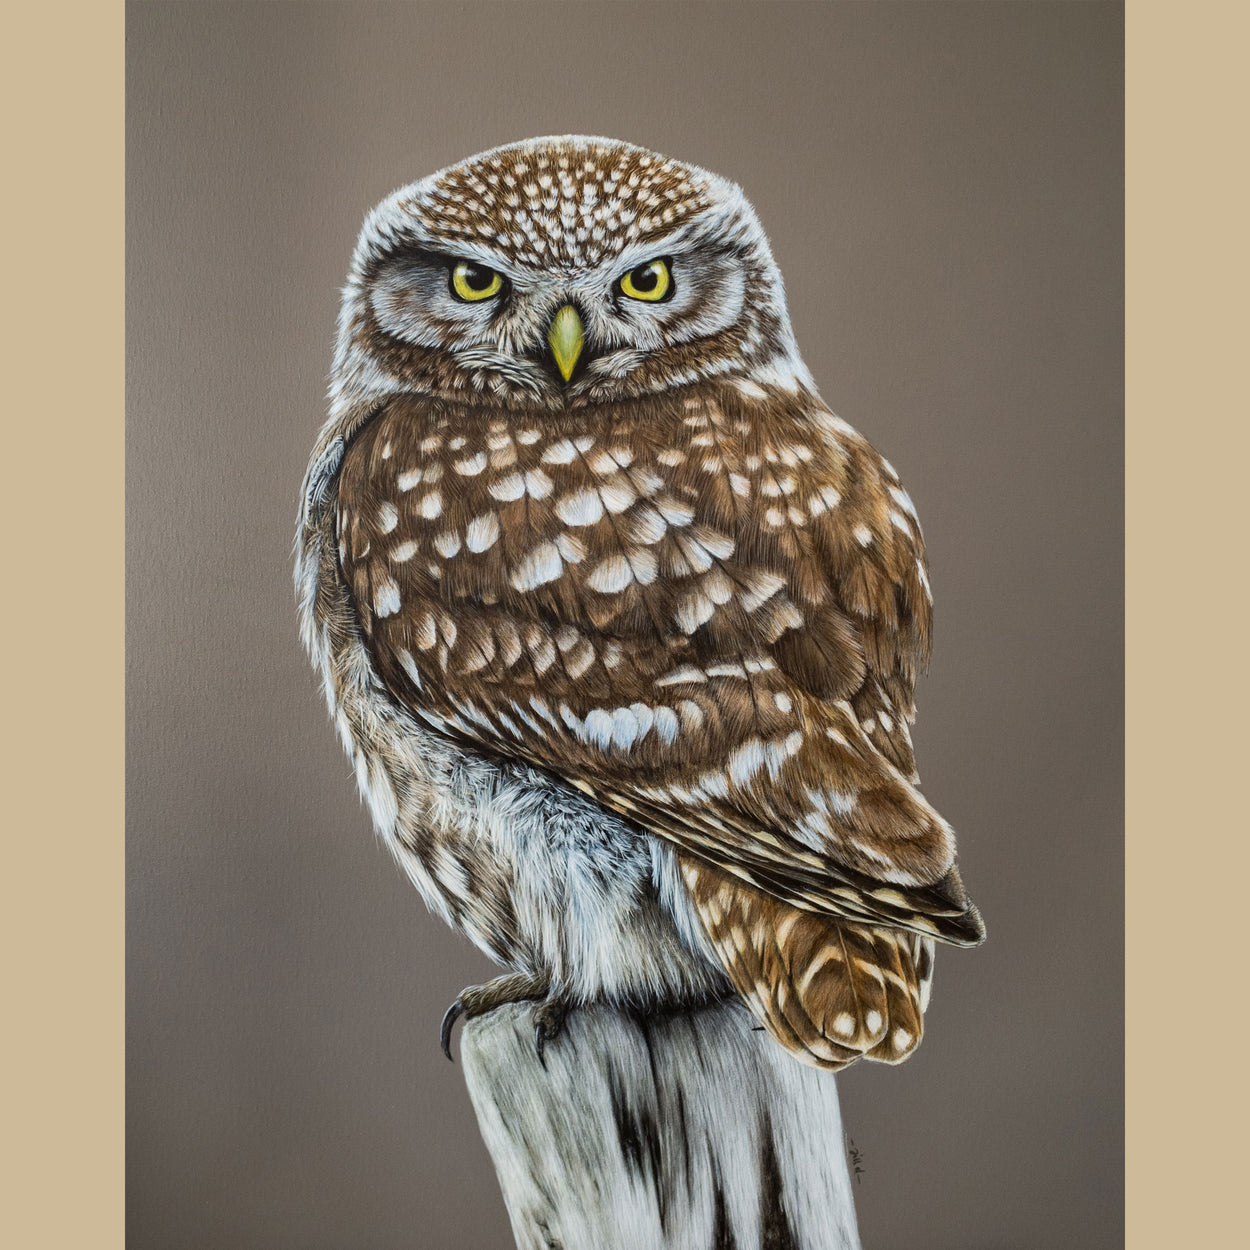 Painting of a little owl looking straight ahead at the viewer